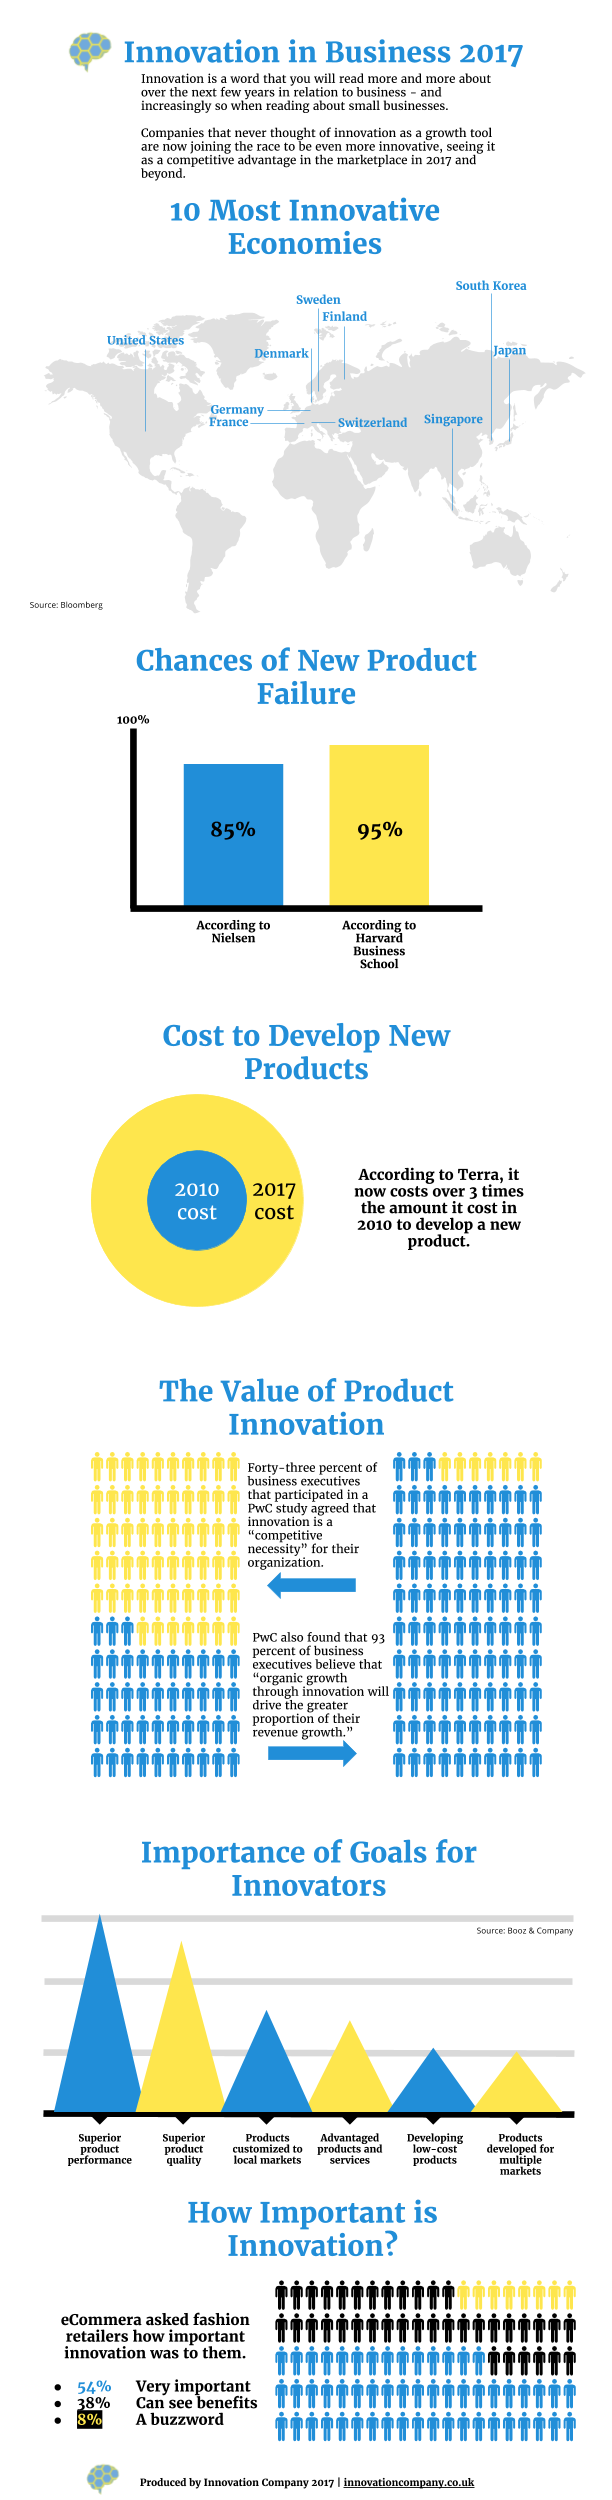 Innovation in Business 2017 Infographic